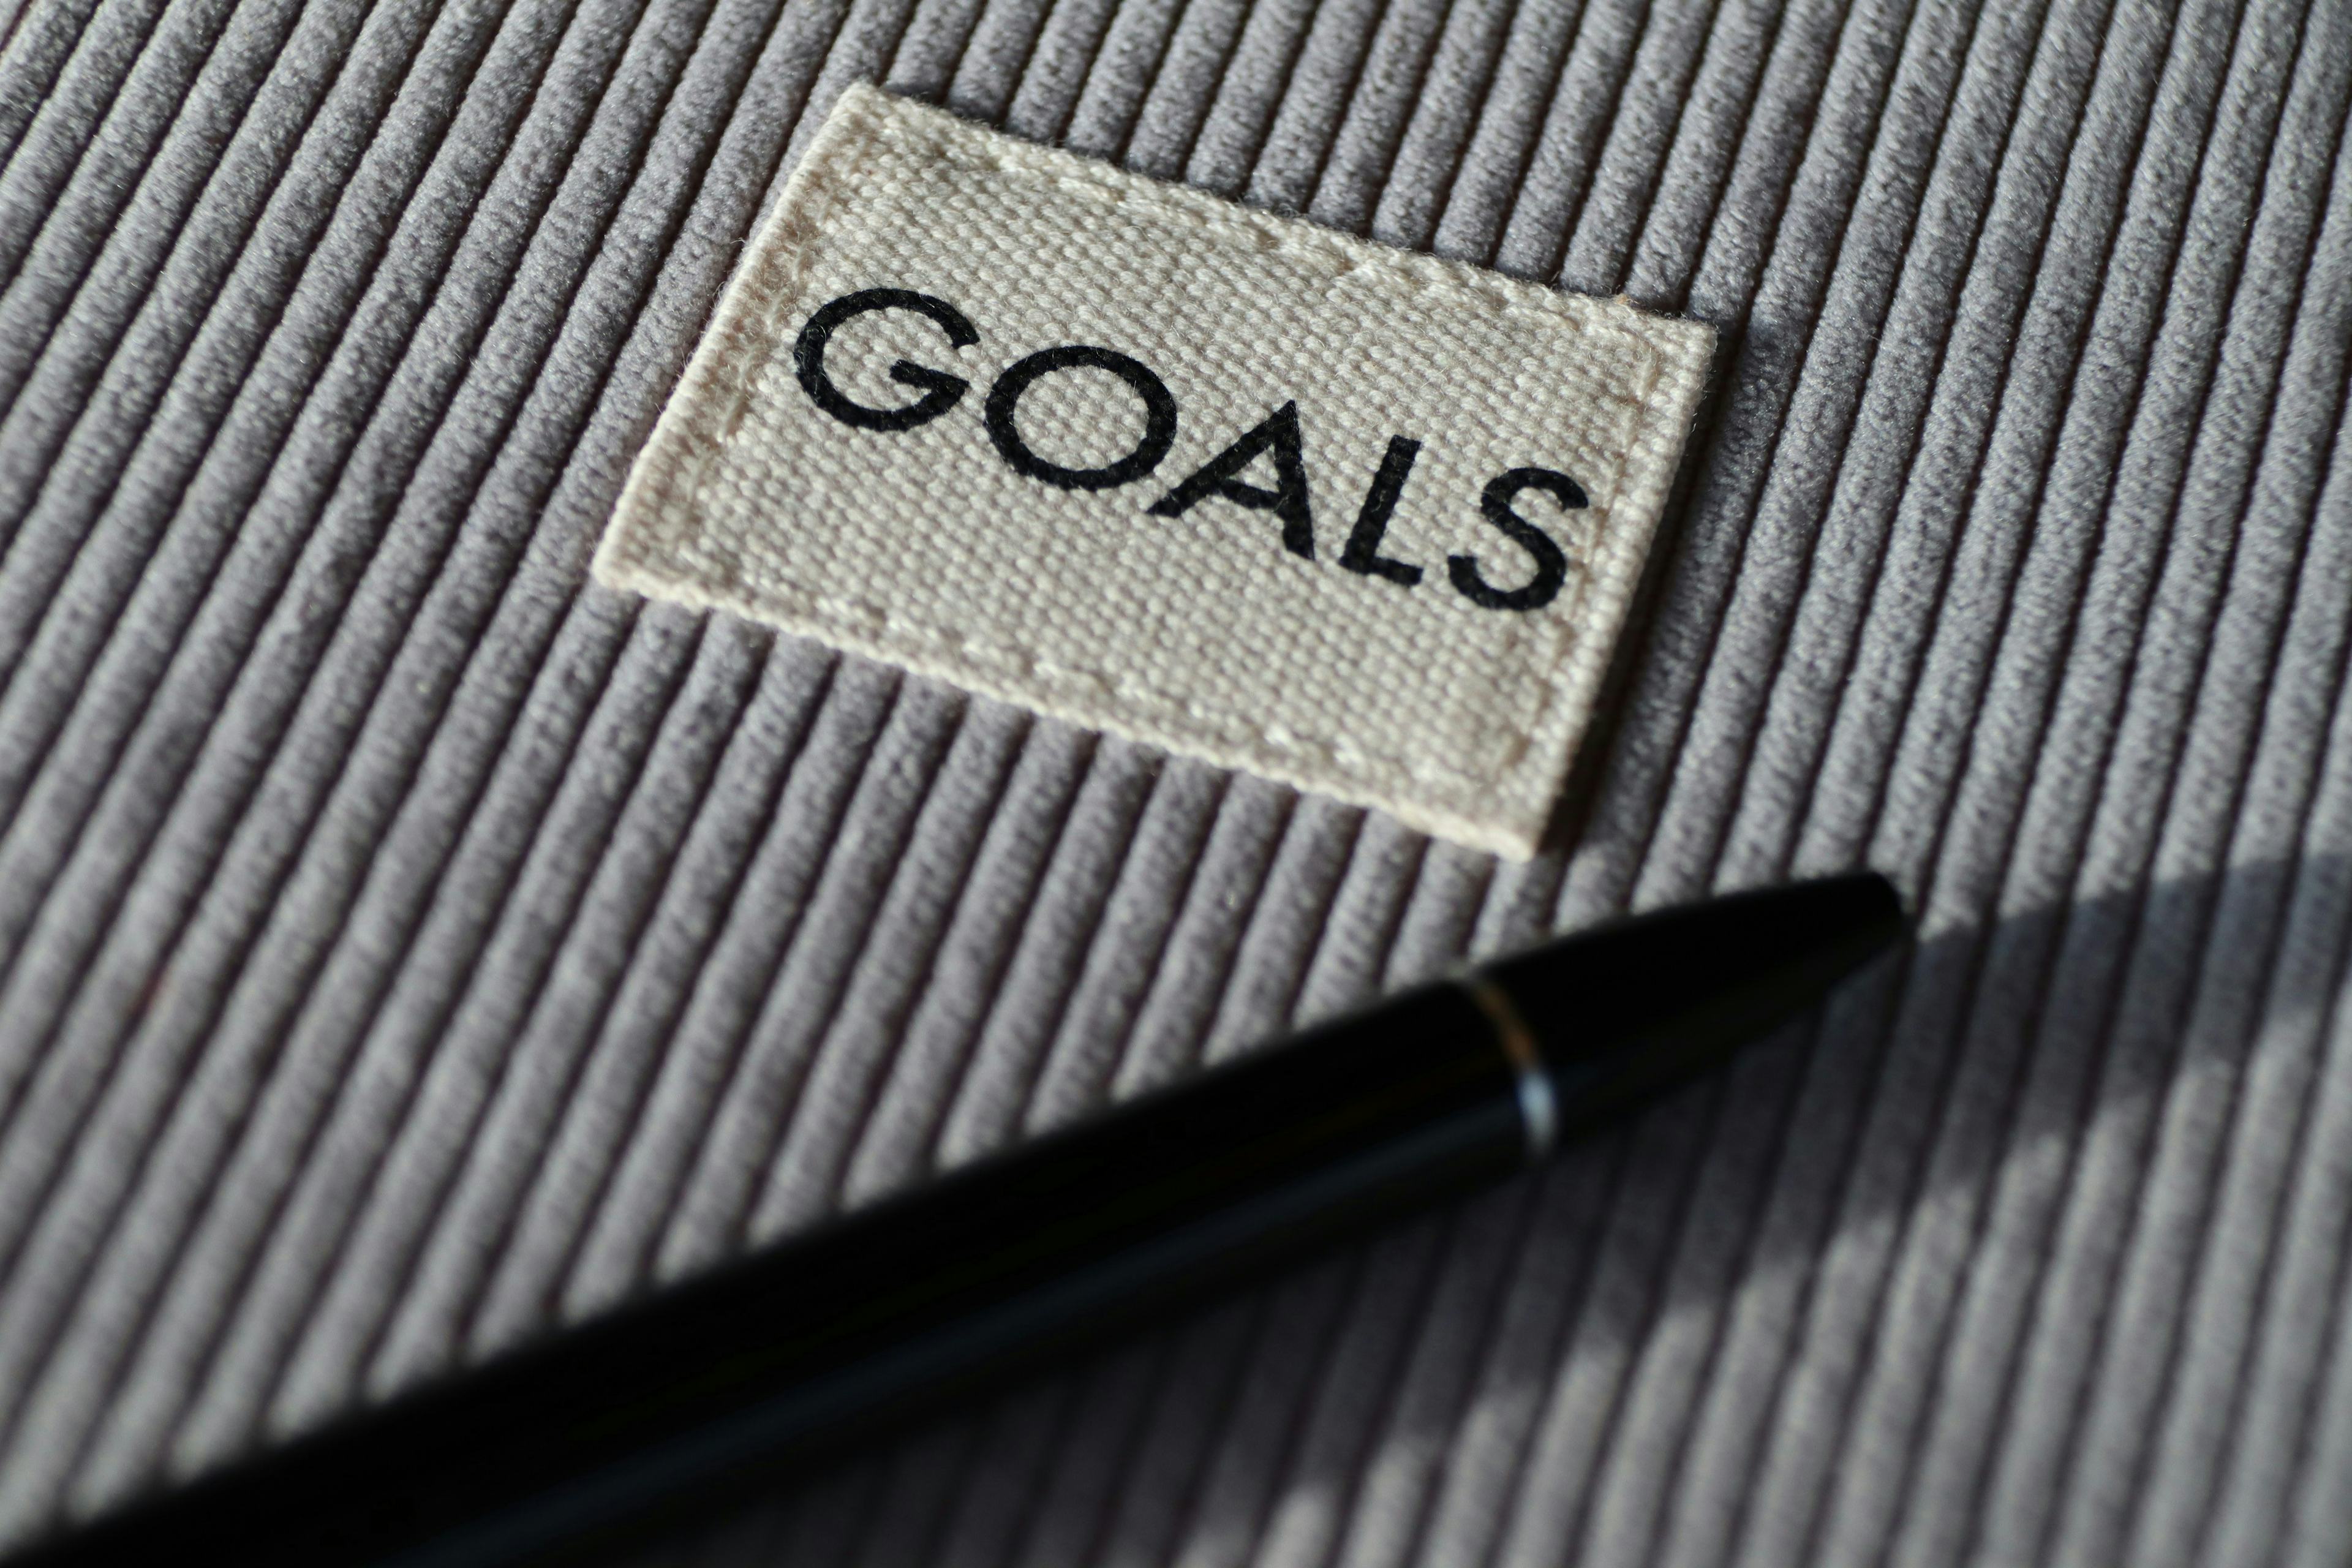 Personal Goal Setting and Life Review Session